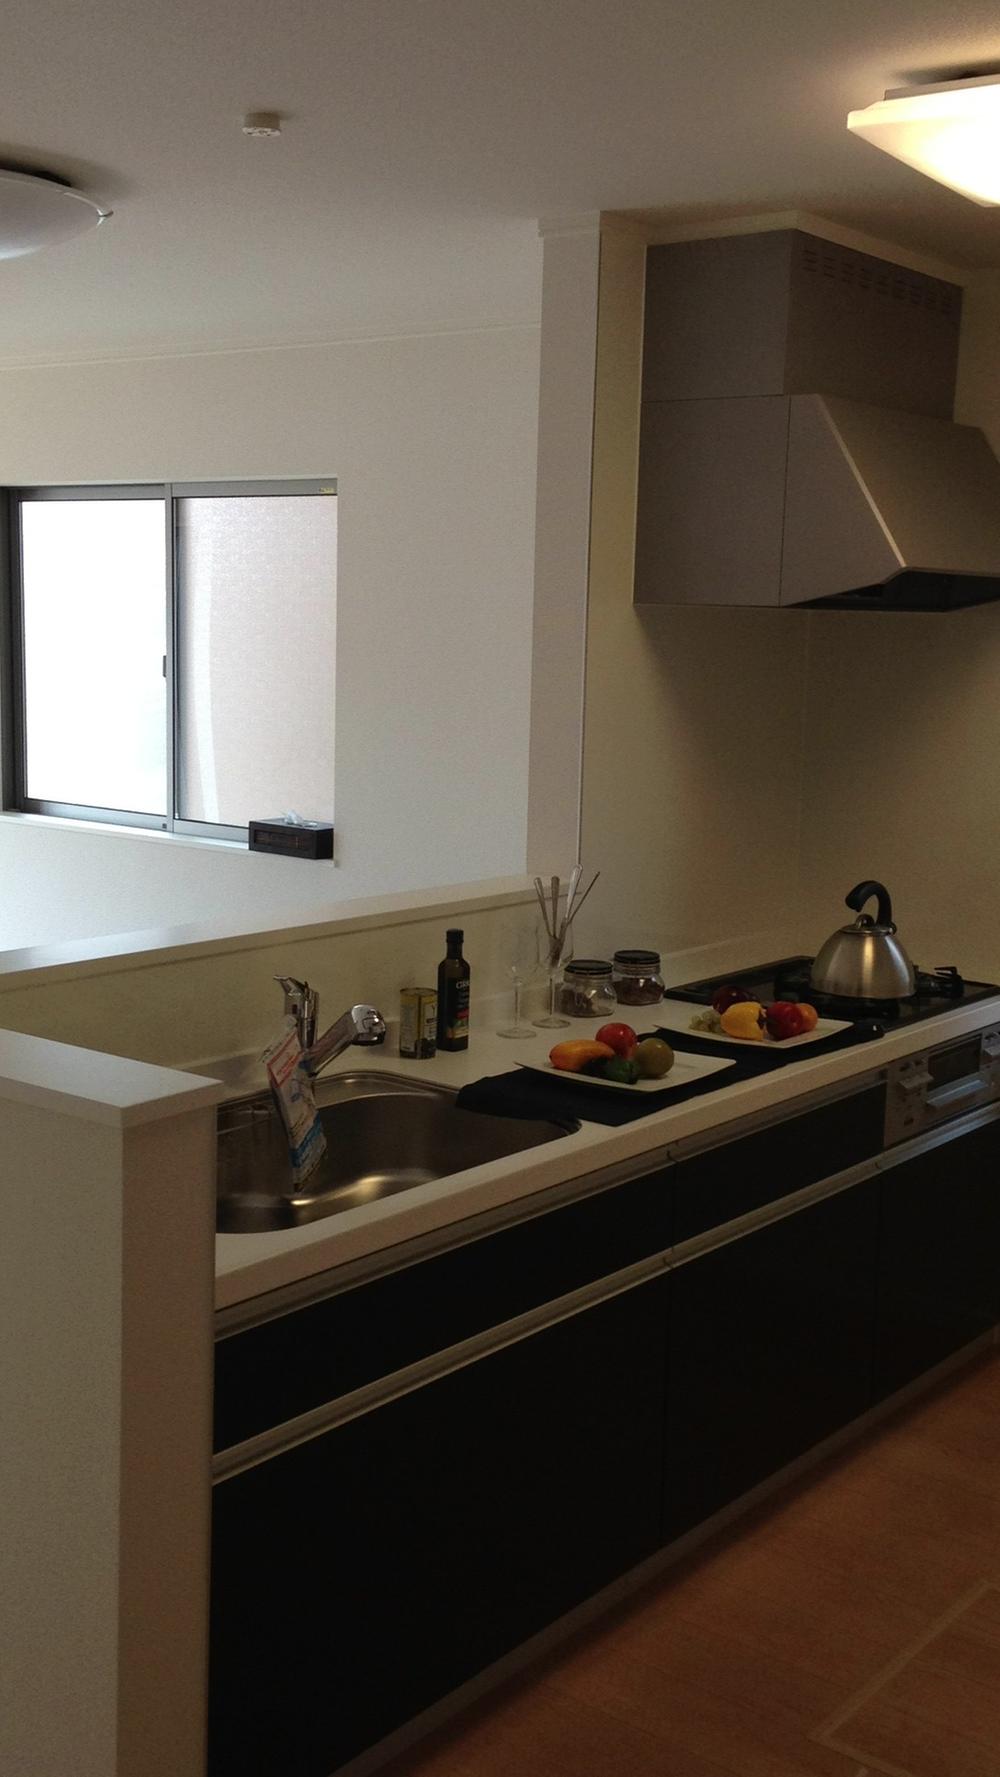 Same specifications photo (kitchen). It will be similar to a reference image